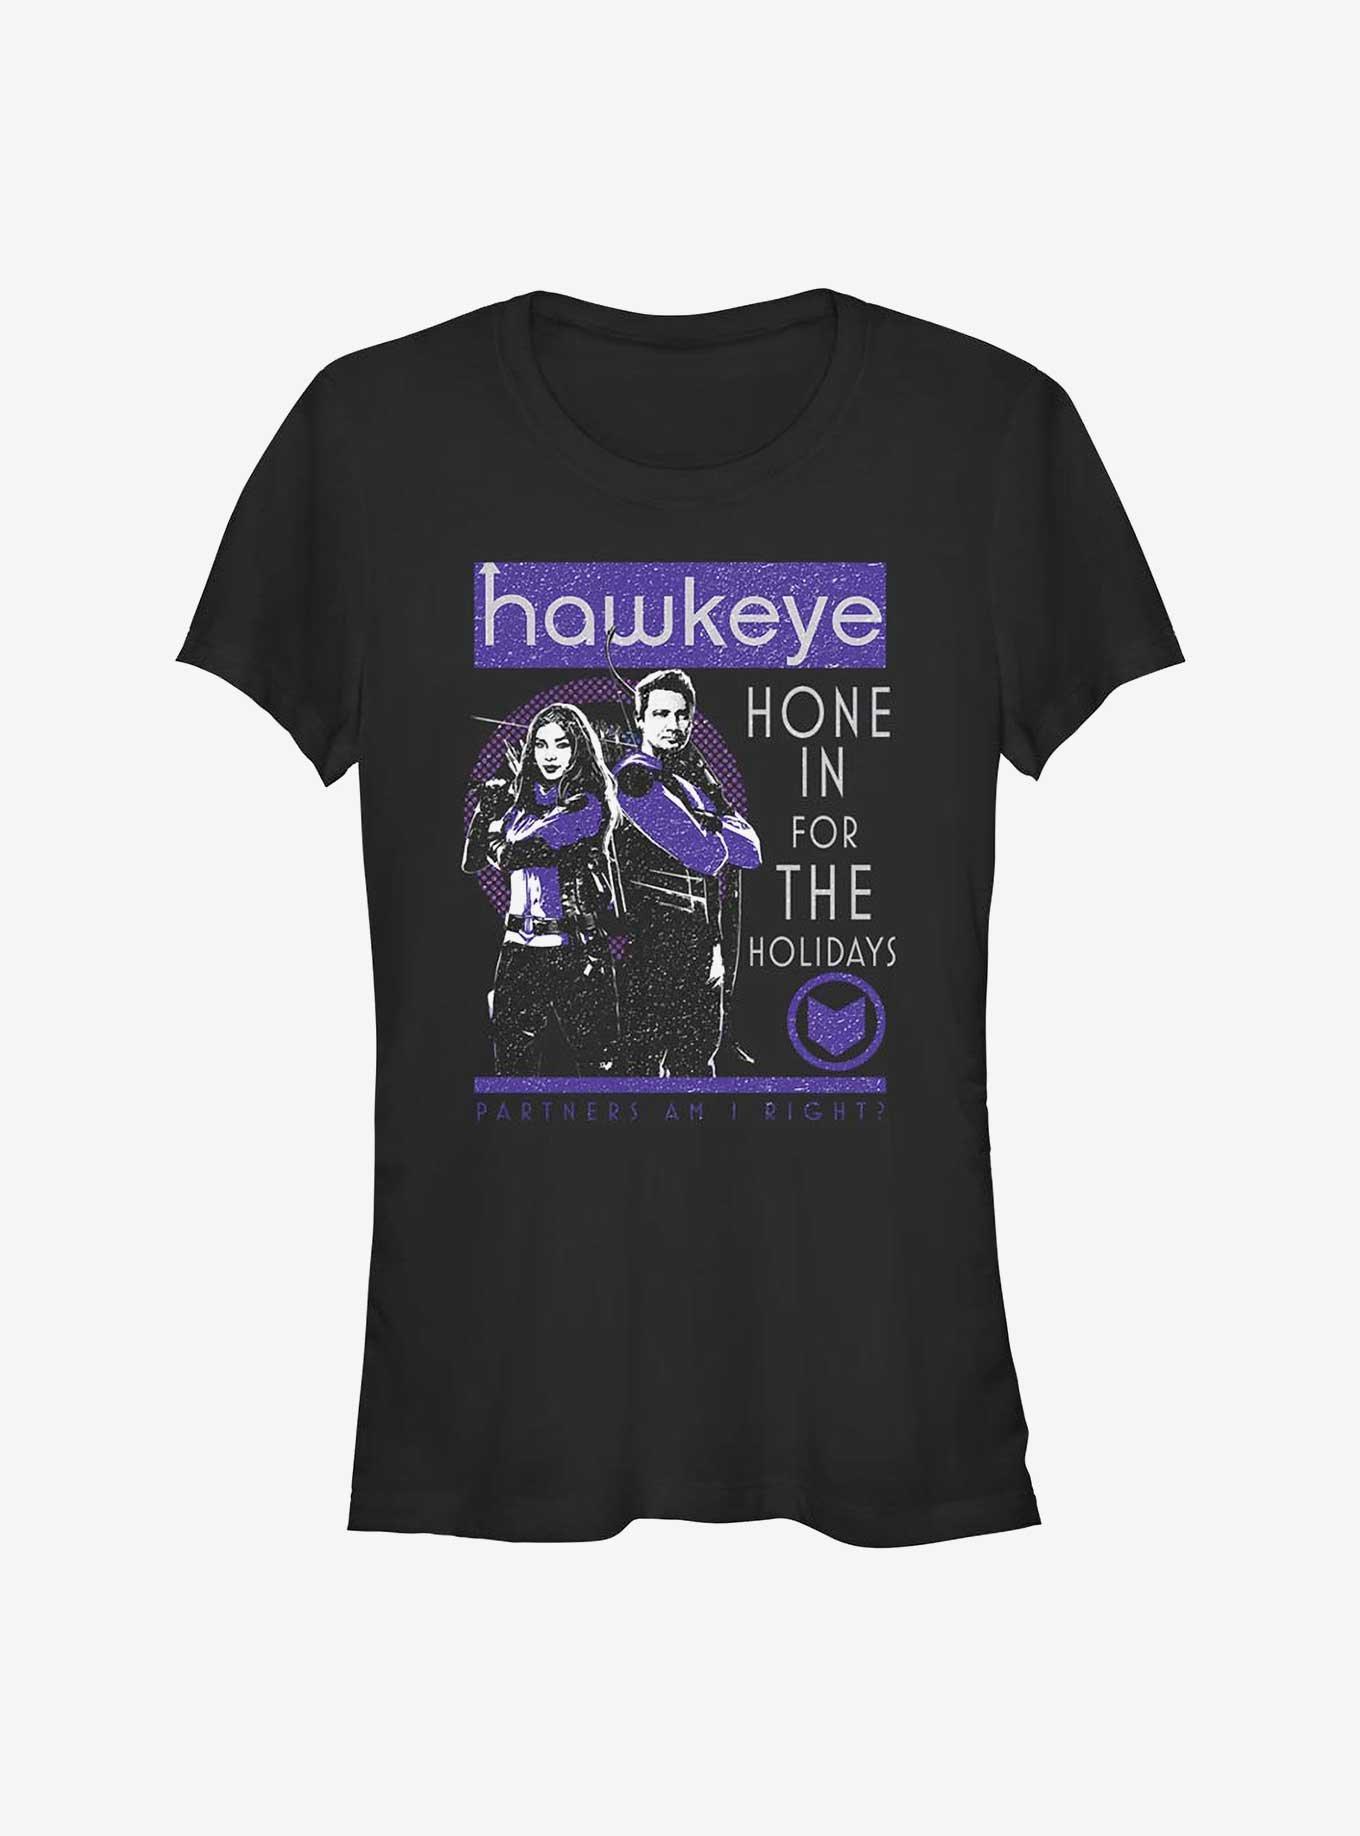 Marvel Hawkeye Hone In For The Holidays Girls T-Shirt, BLACK, hi-res